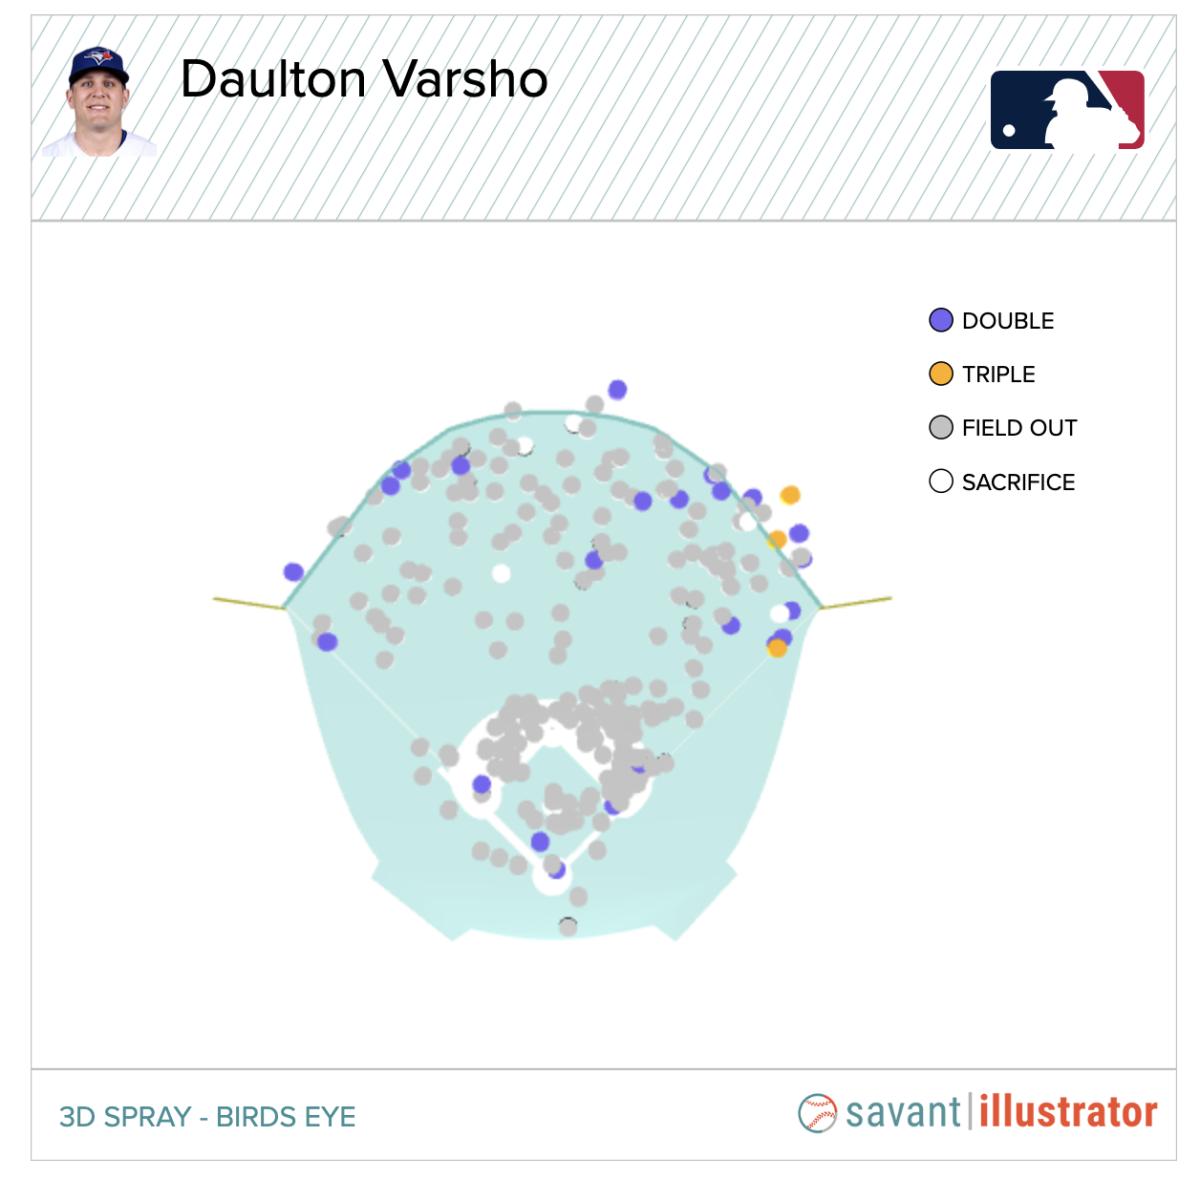 Varsho's 2022 spray chart (not including homers) overlaid on Rogers Centre's 2022 dimensions.